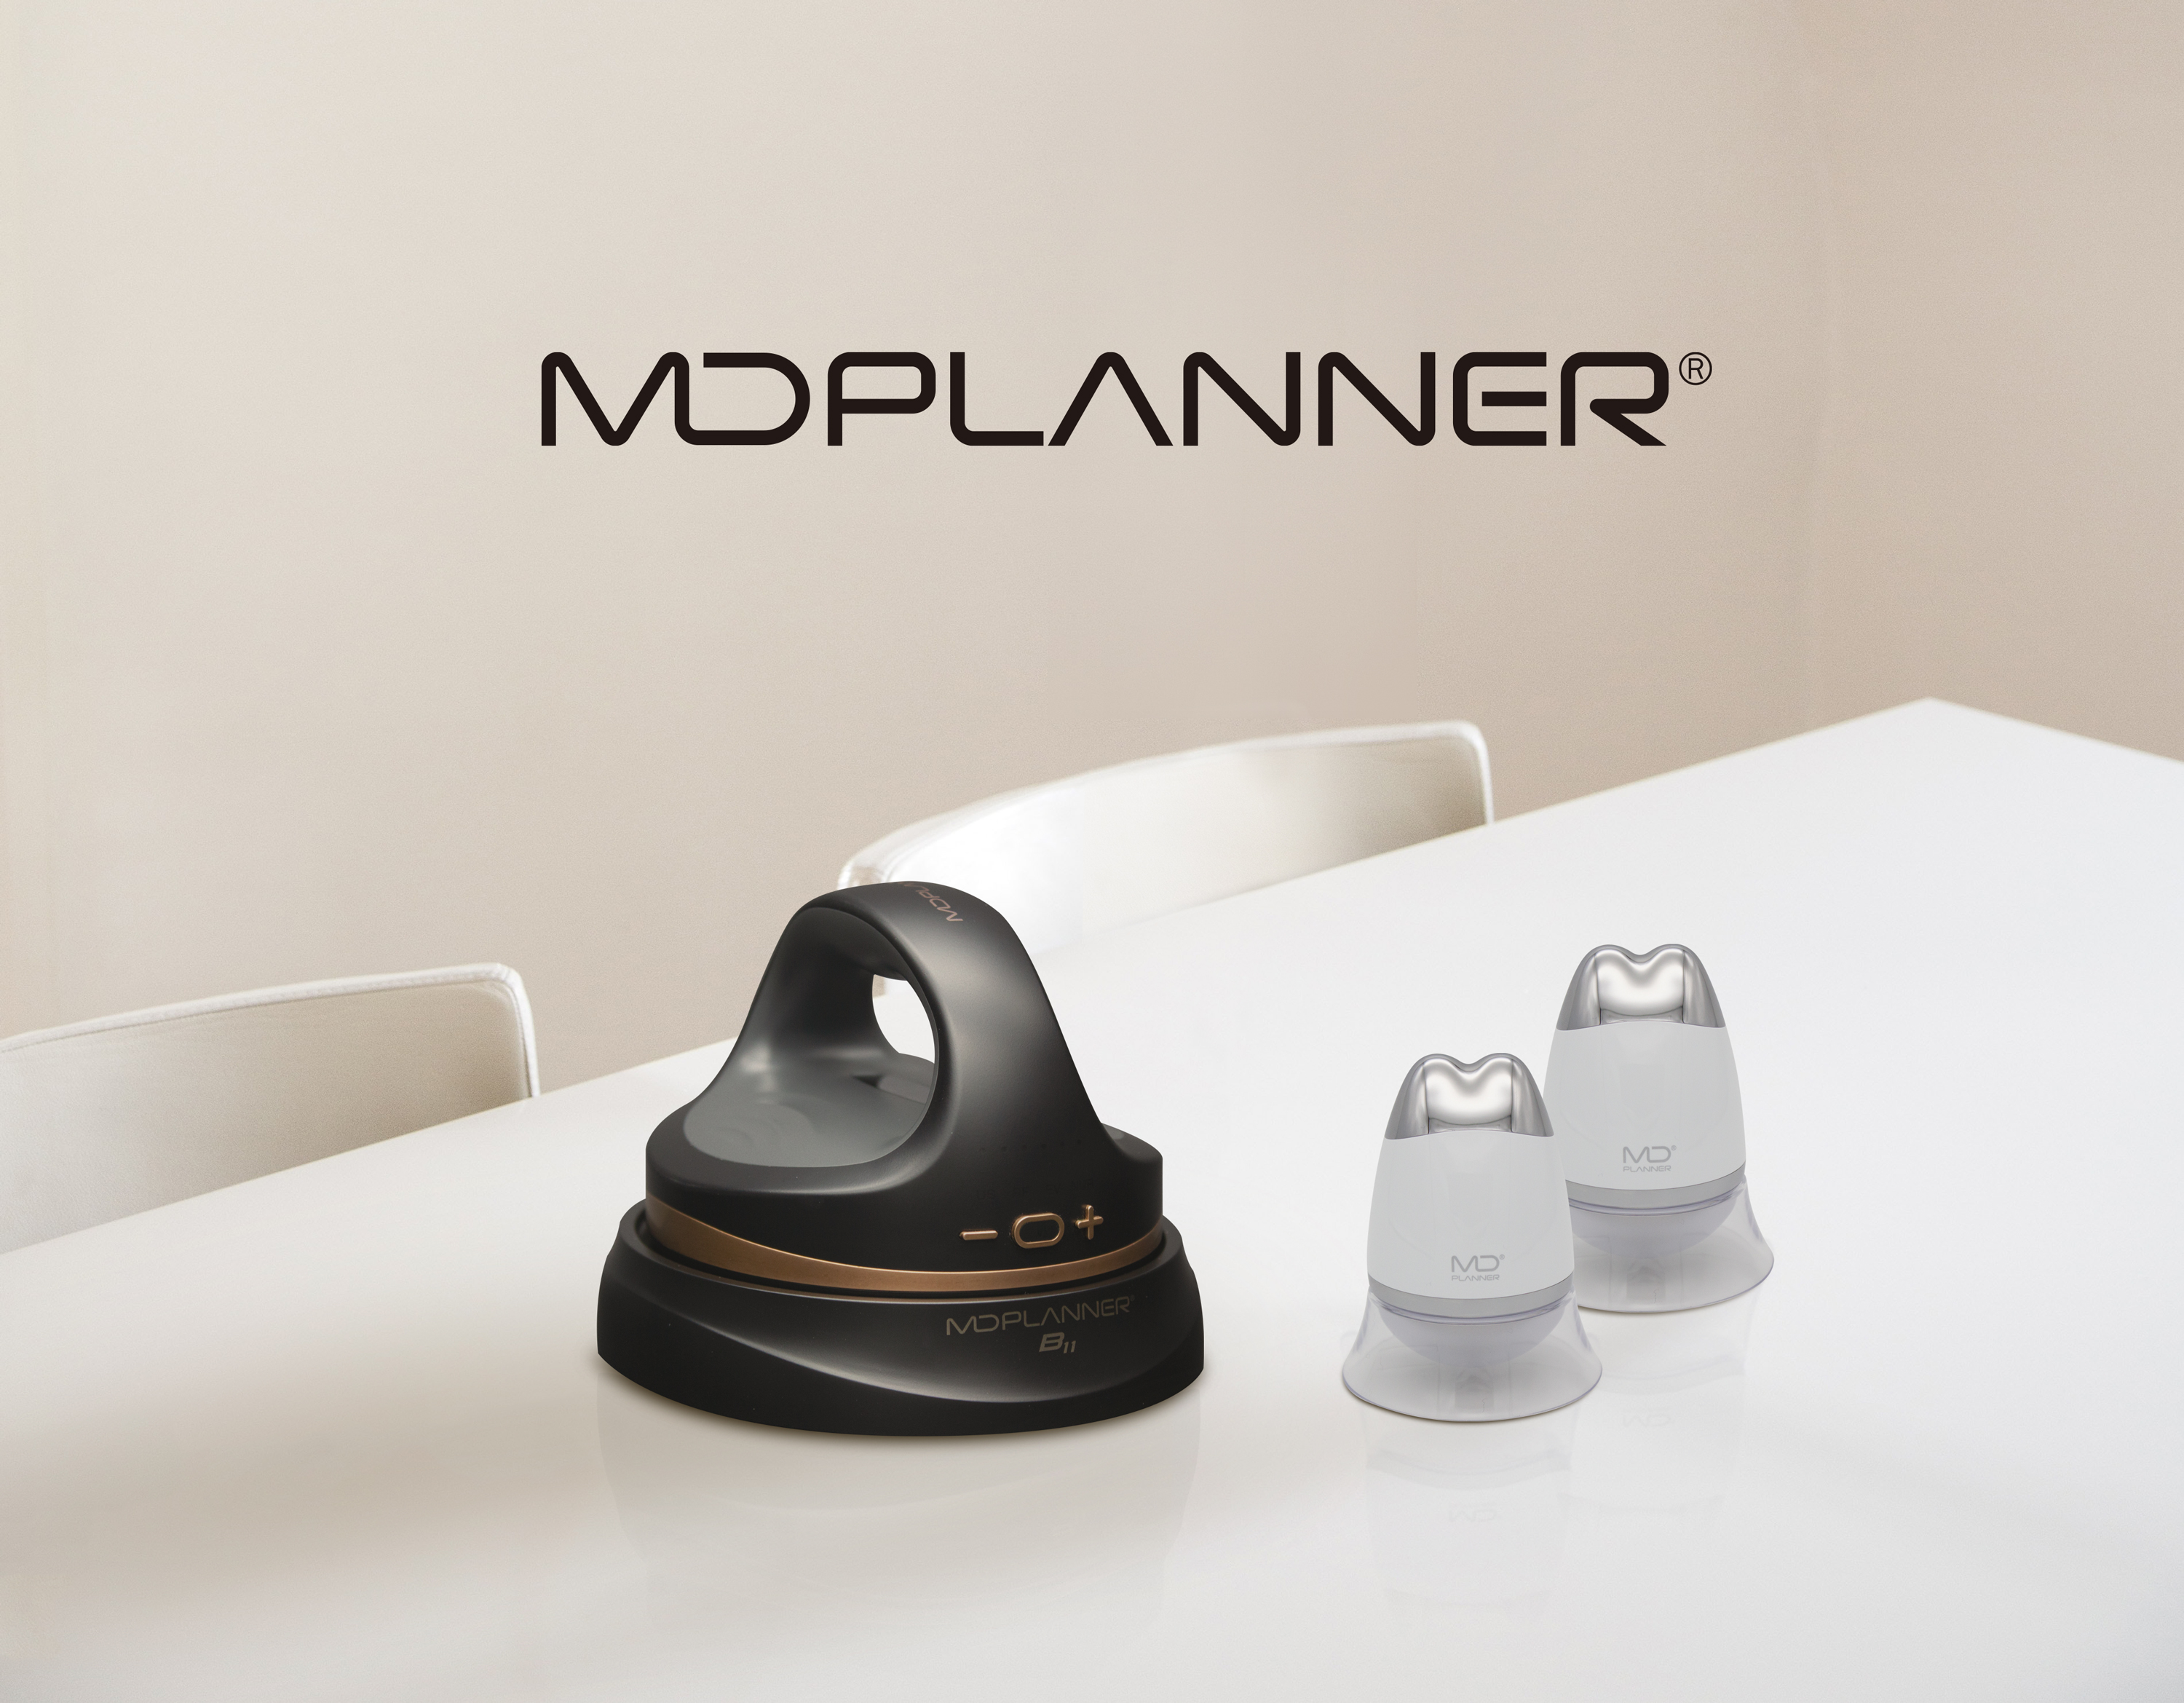 Nutricare launches the new product beauty device MD Planner B11 and MD Planner T3 EGG.